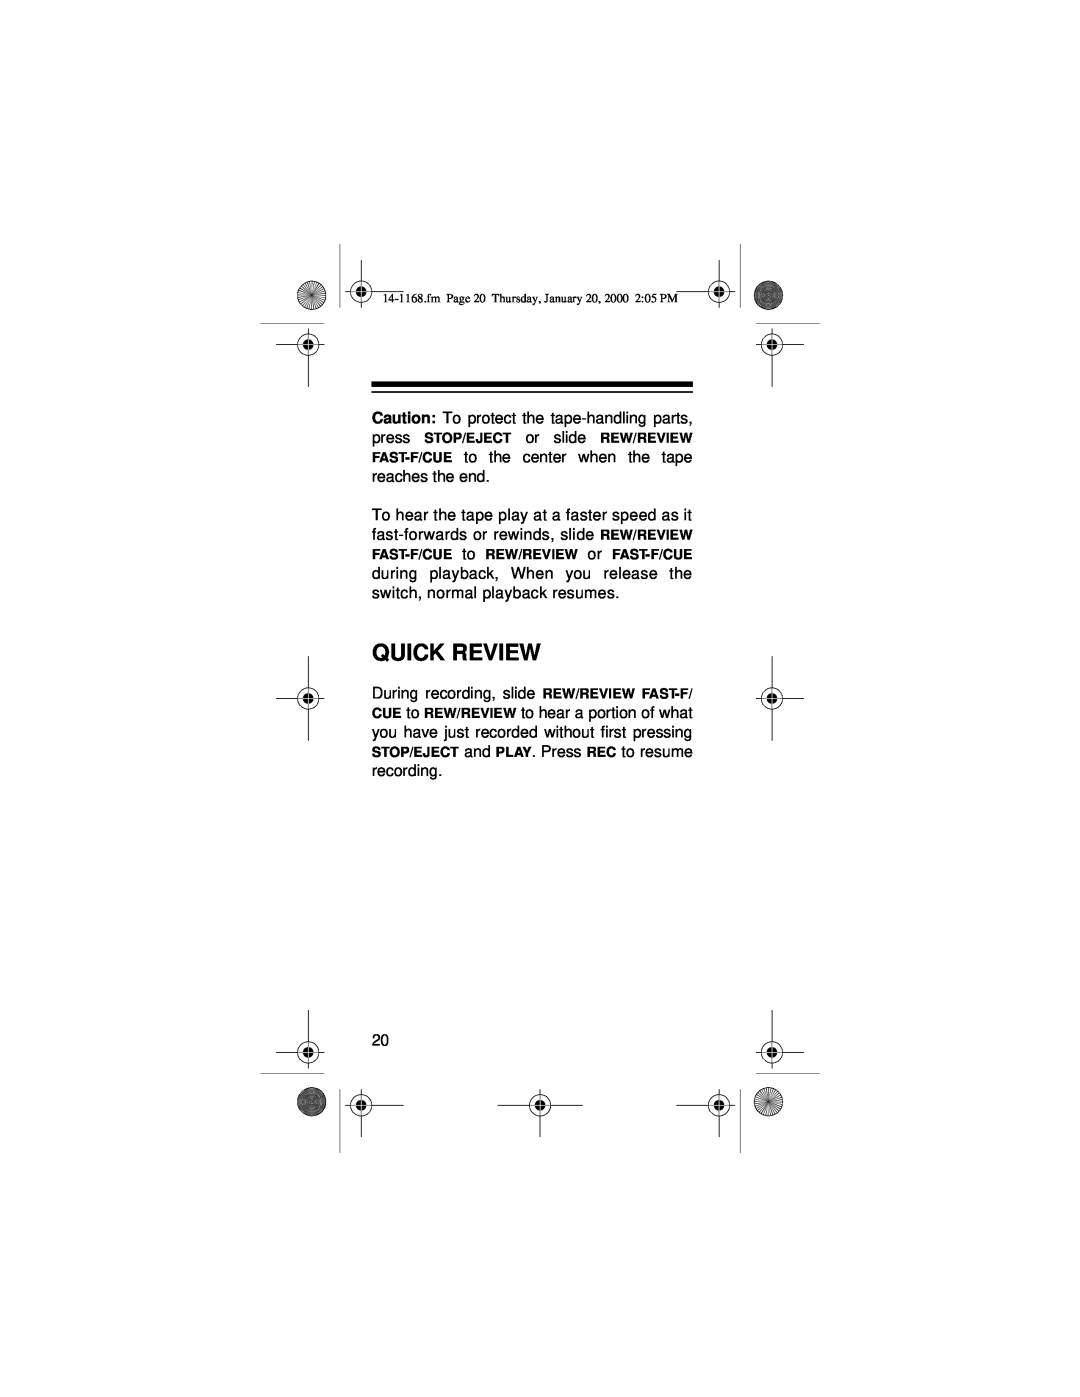 Optimus 14-1168, Micro-40 owner manual Quick Review, reaches the end, STOP/EJECT and PLAY. Press REC to resume recording 